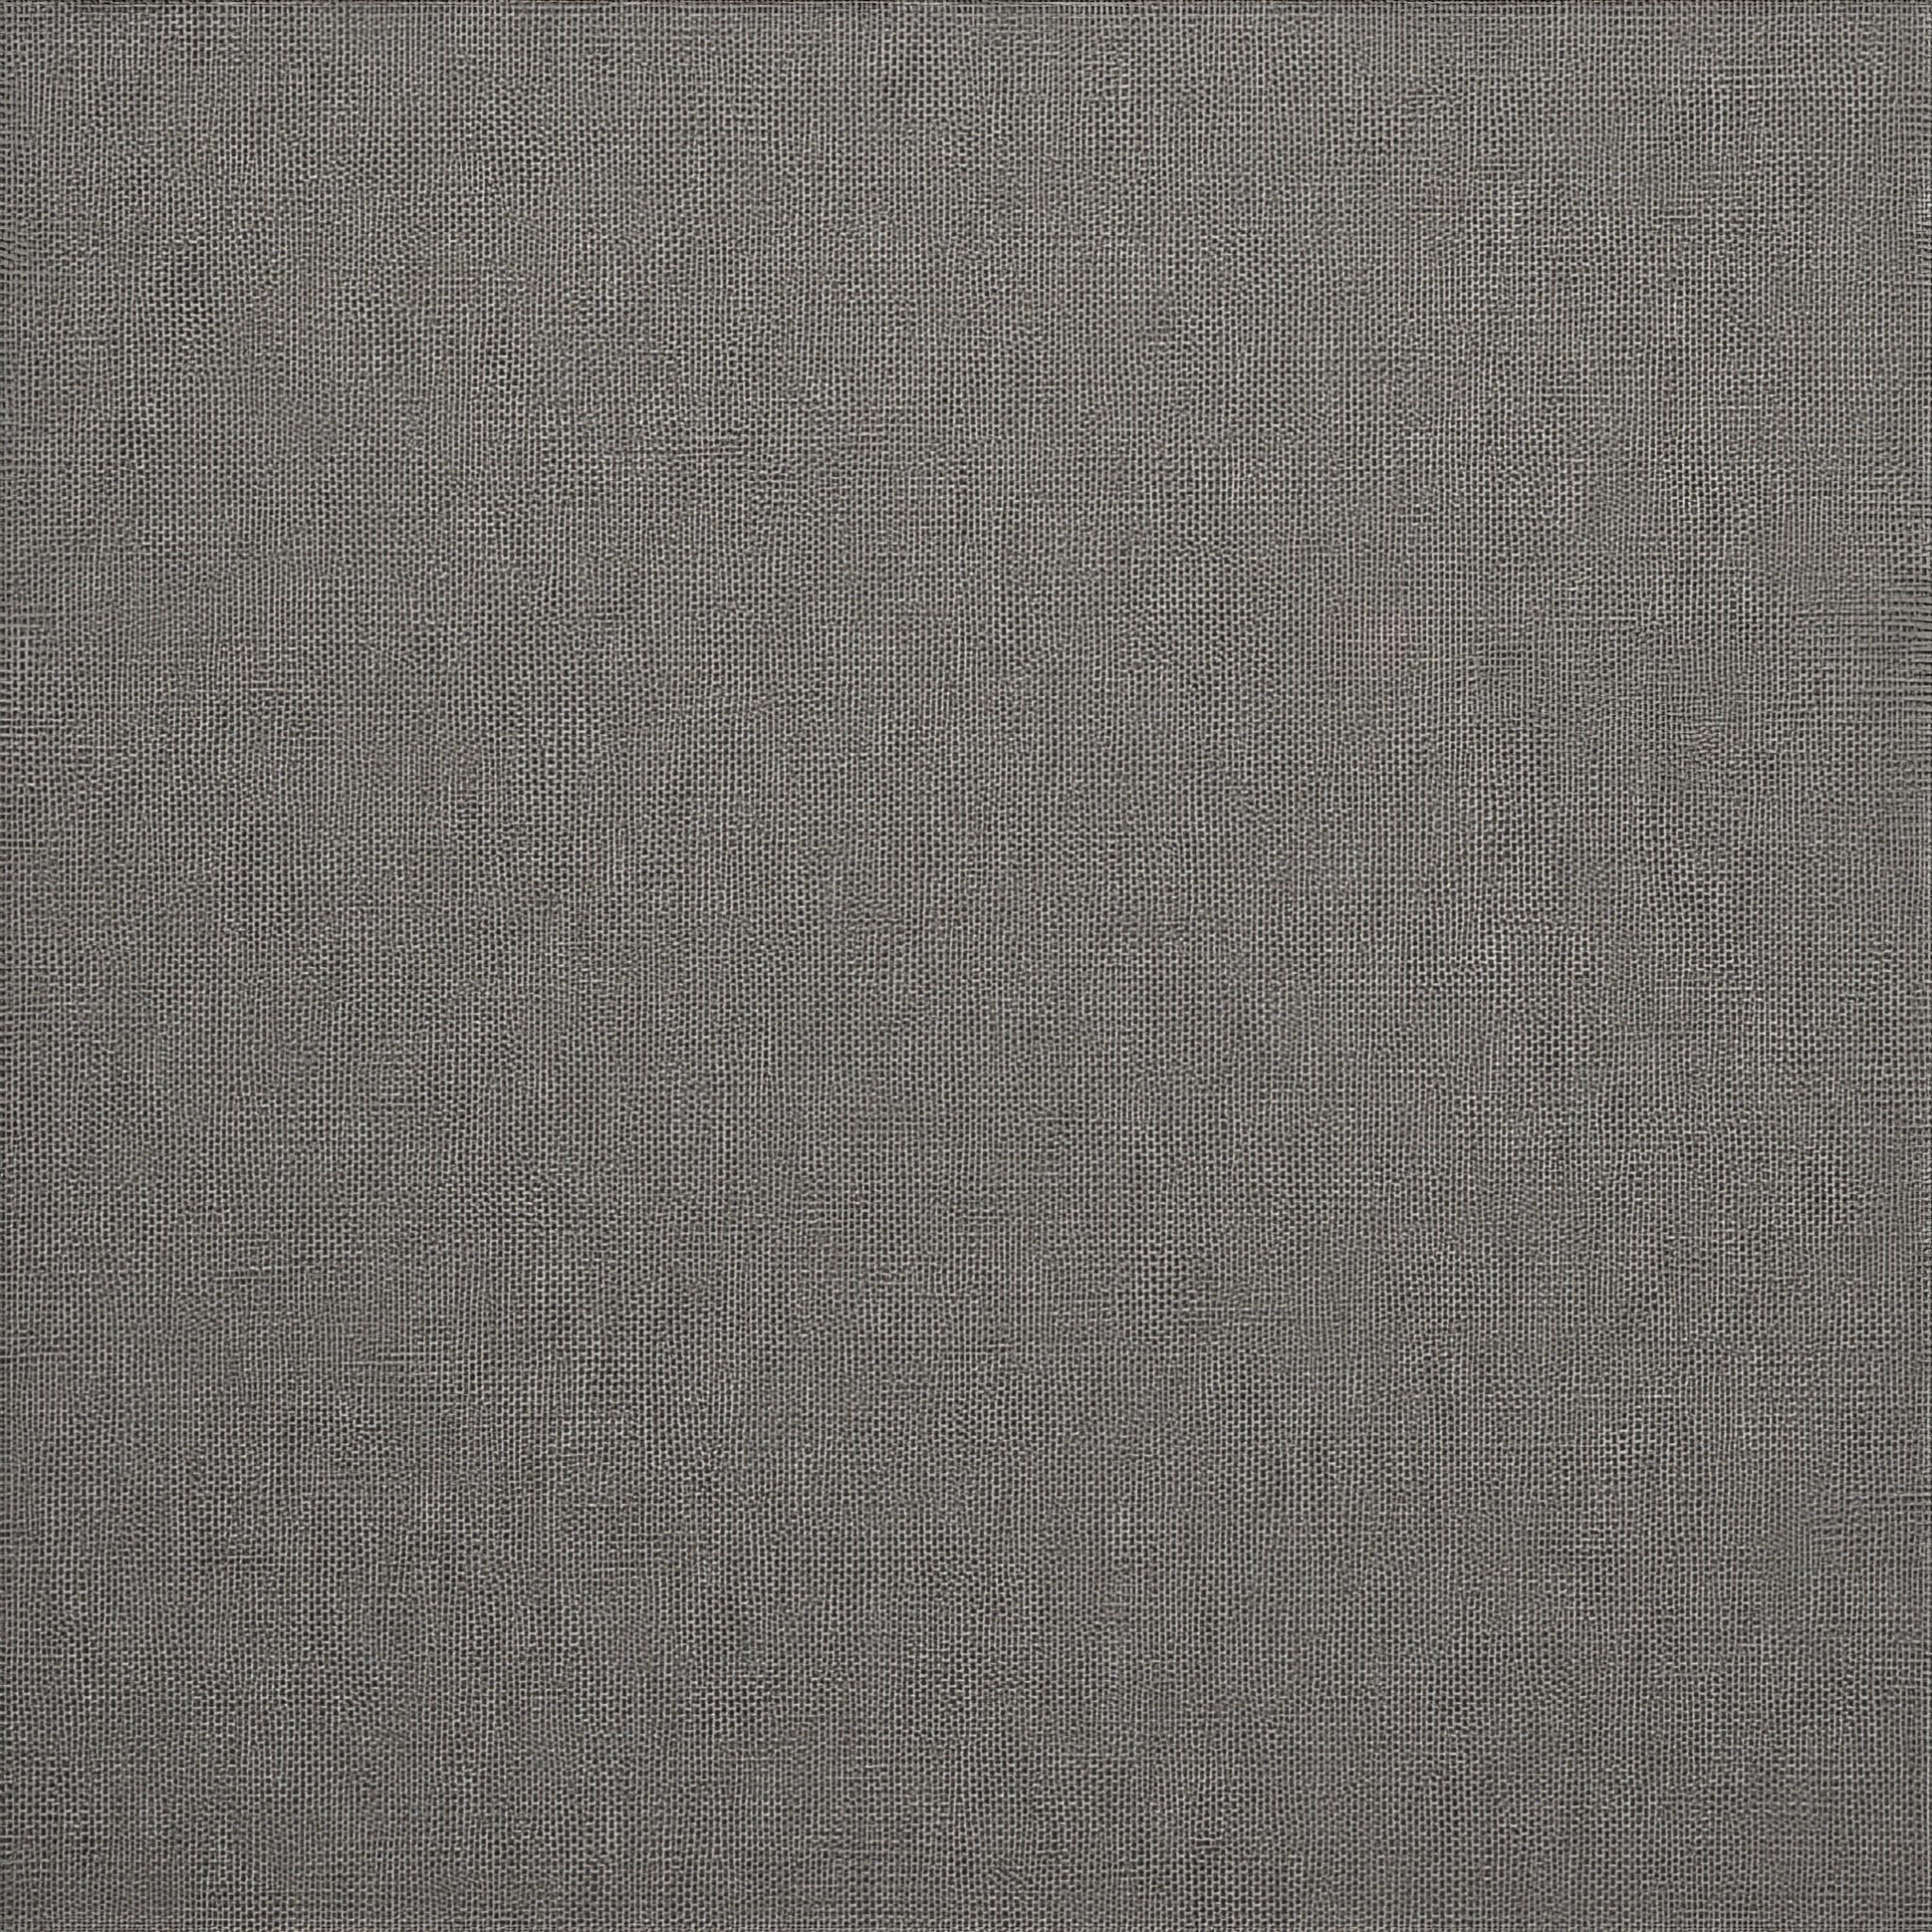 Grey Woven Linen Fabric Texture Tile Free Stock Image